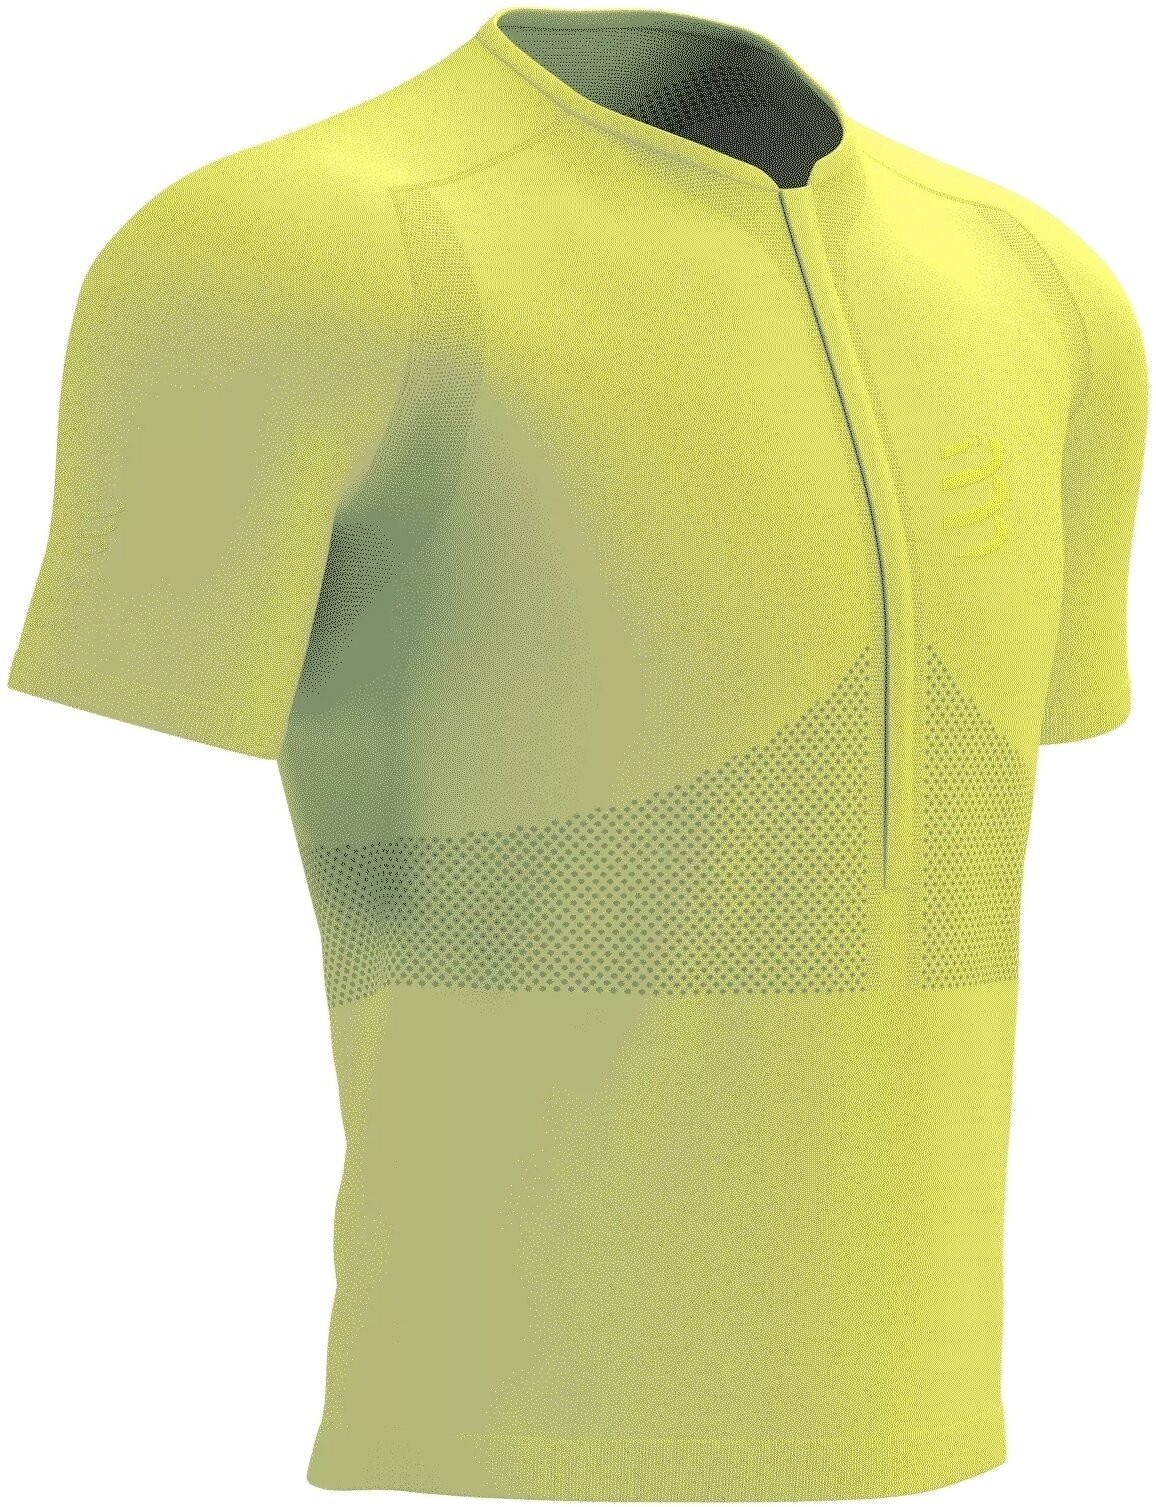 Chemise de course à manches courtes Compressport Trail Half-Zip Fitted SS Top Green Sheen/Safety Yellow XL Chemise de course à manches courtes